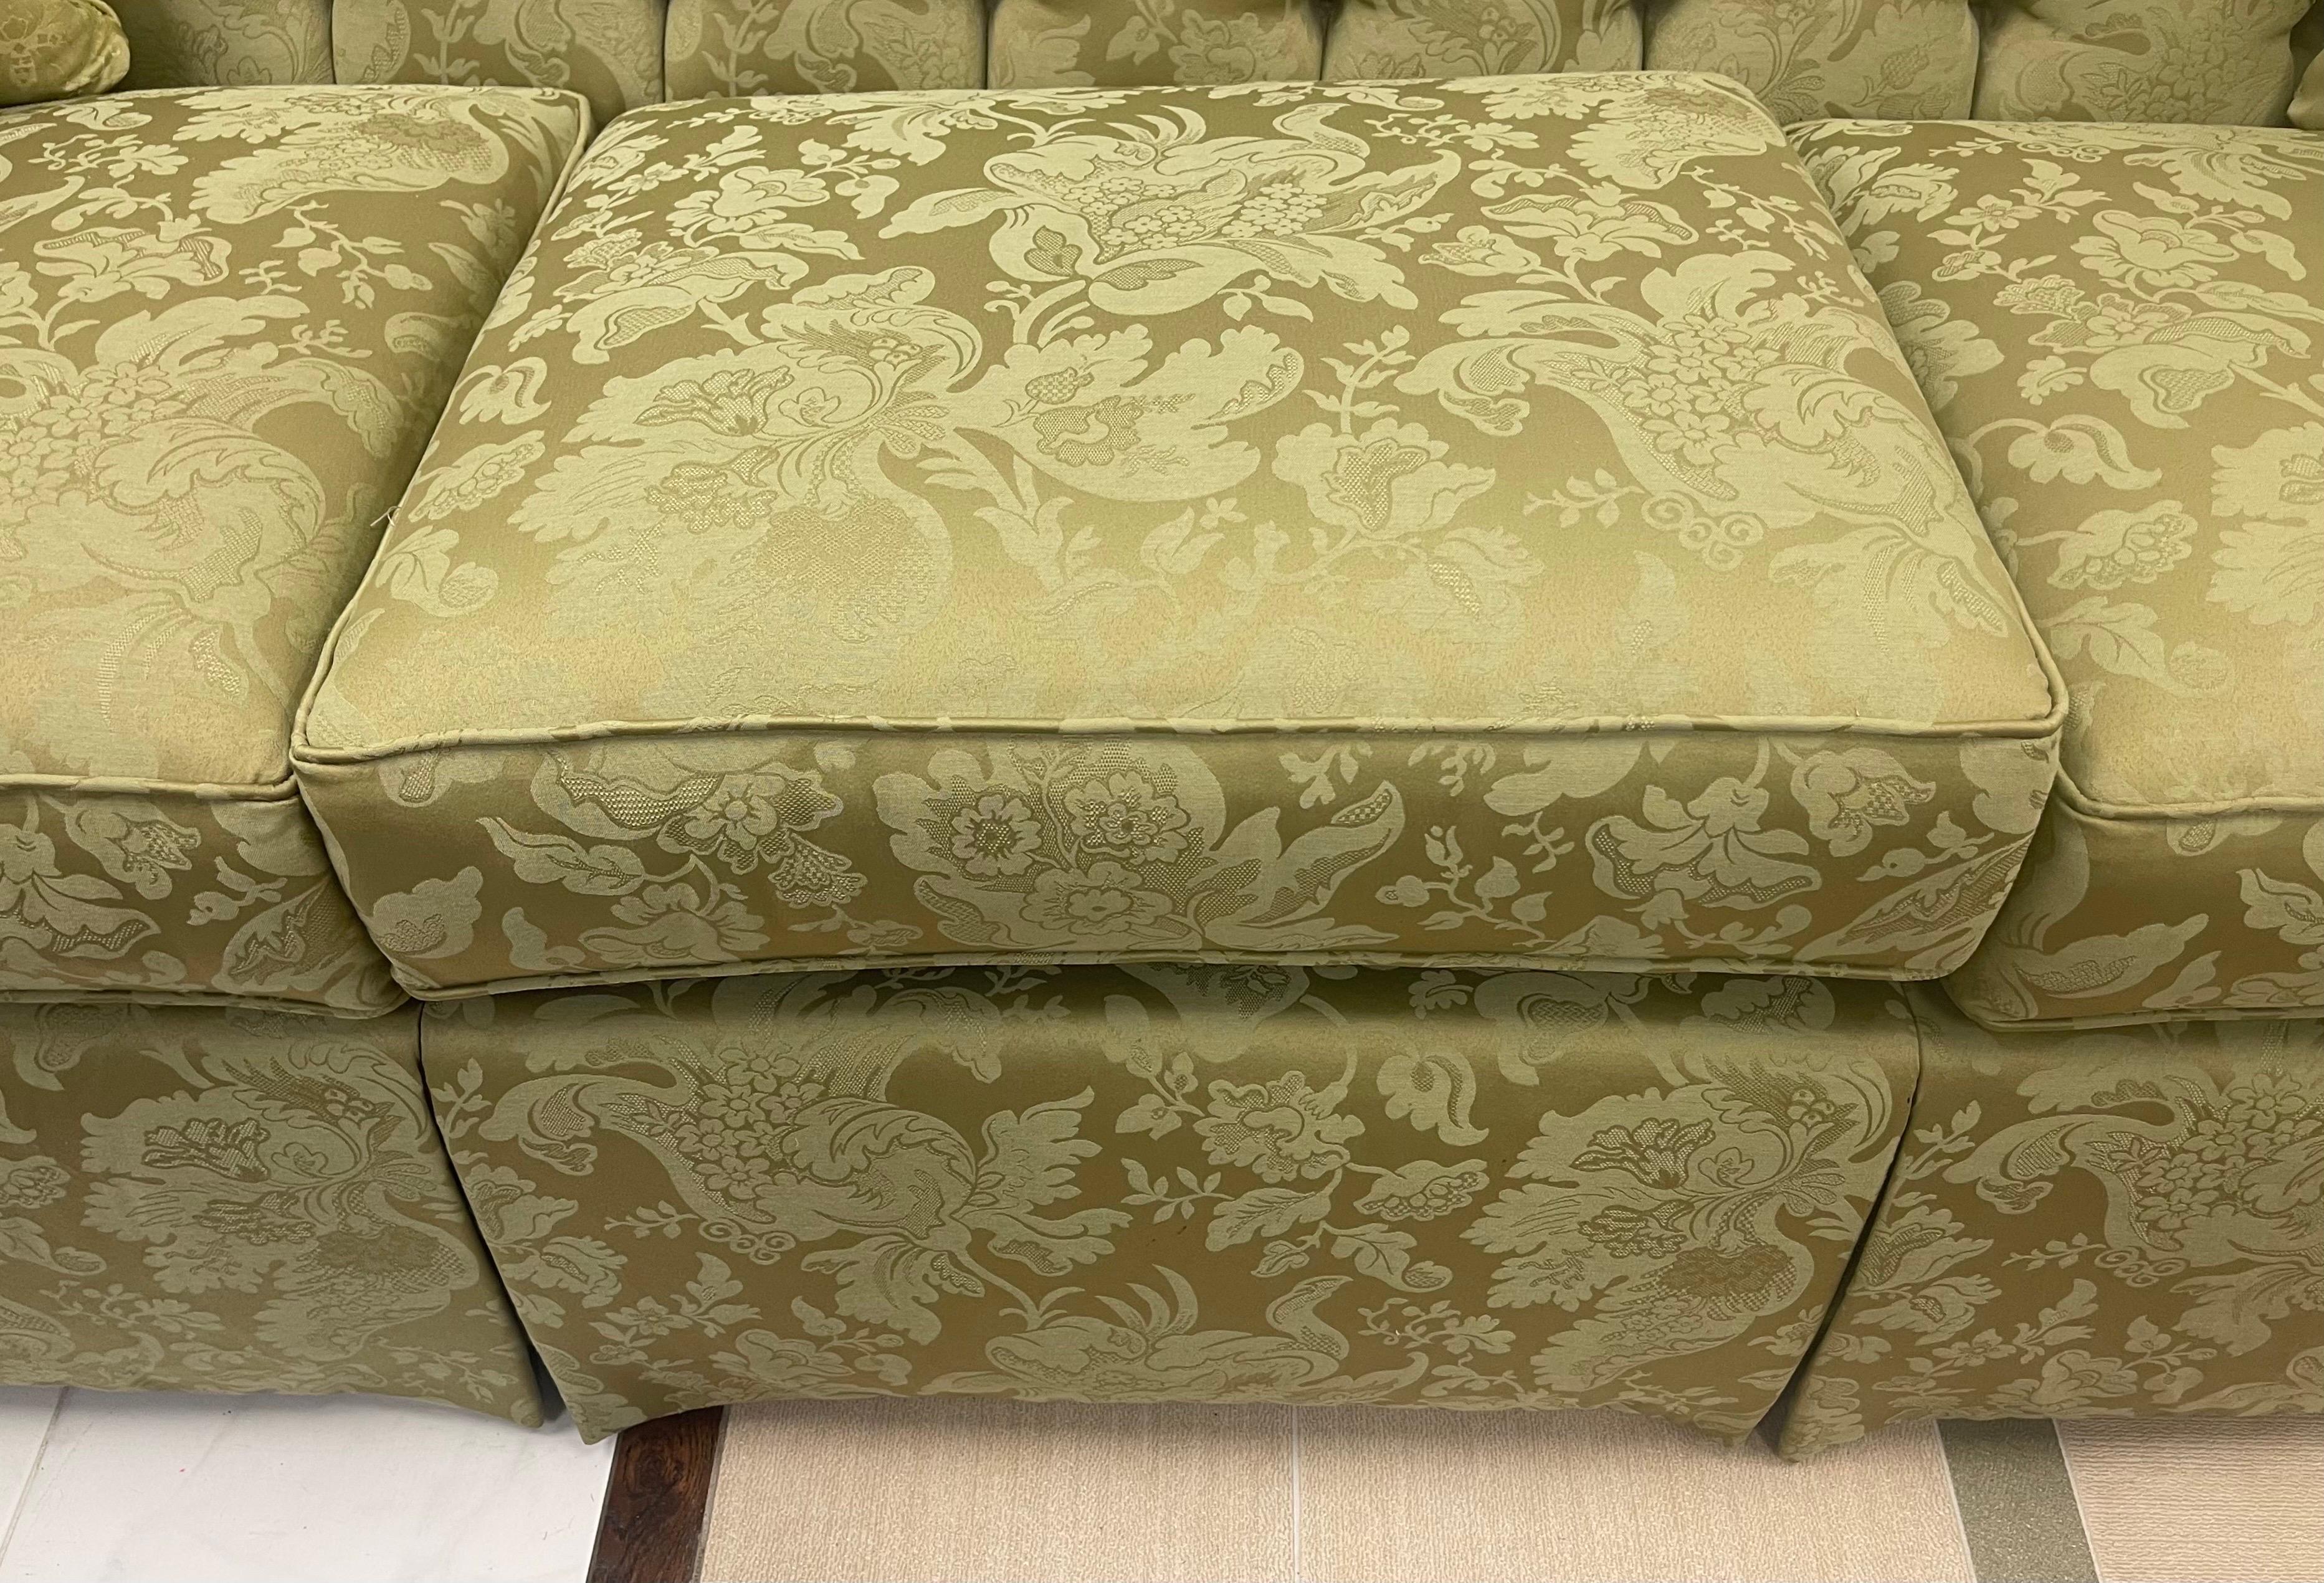 Chesterfield Tufted Three Seater Sofa in Rare Olive Paisley Upholstery 4